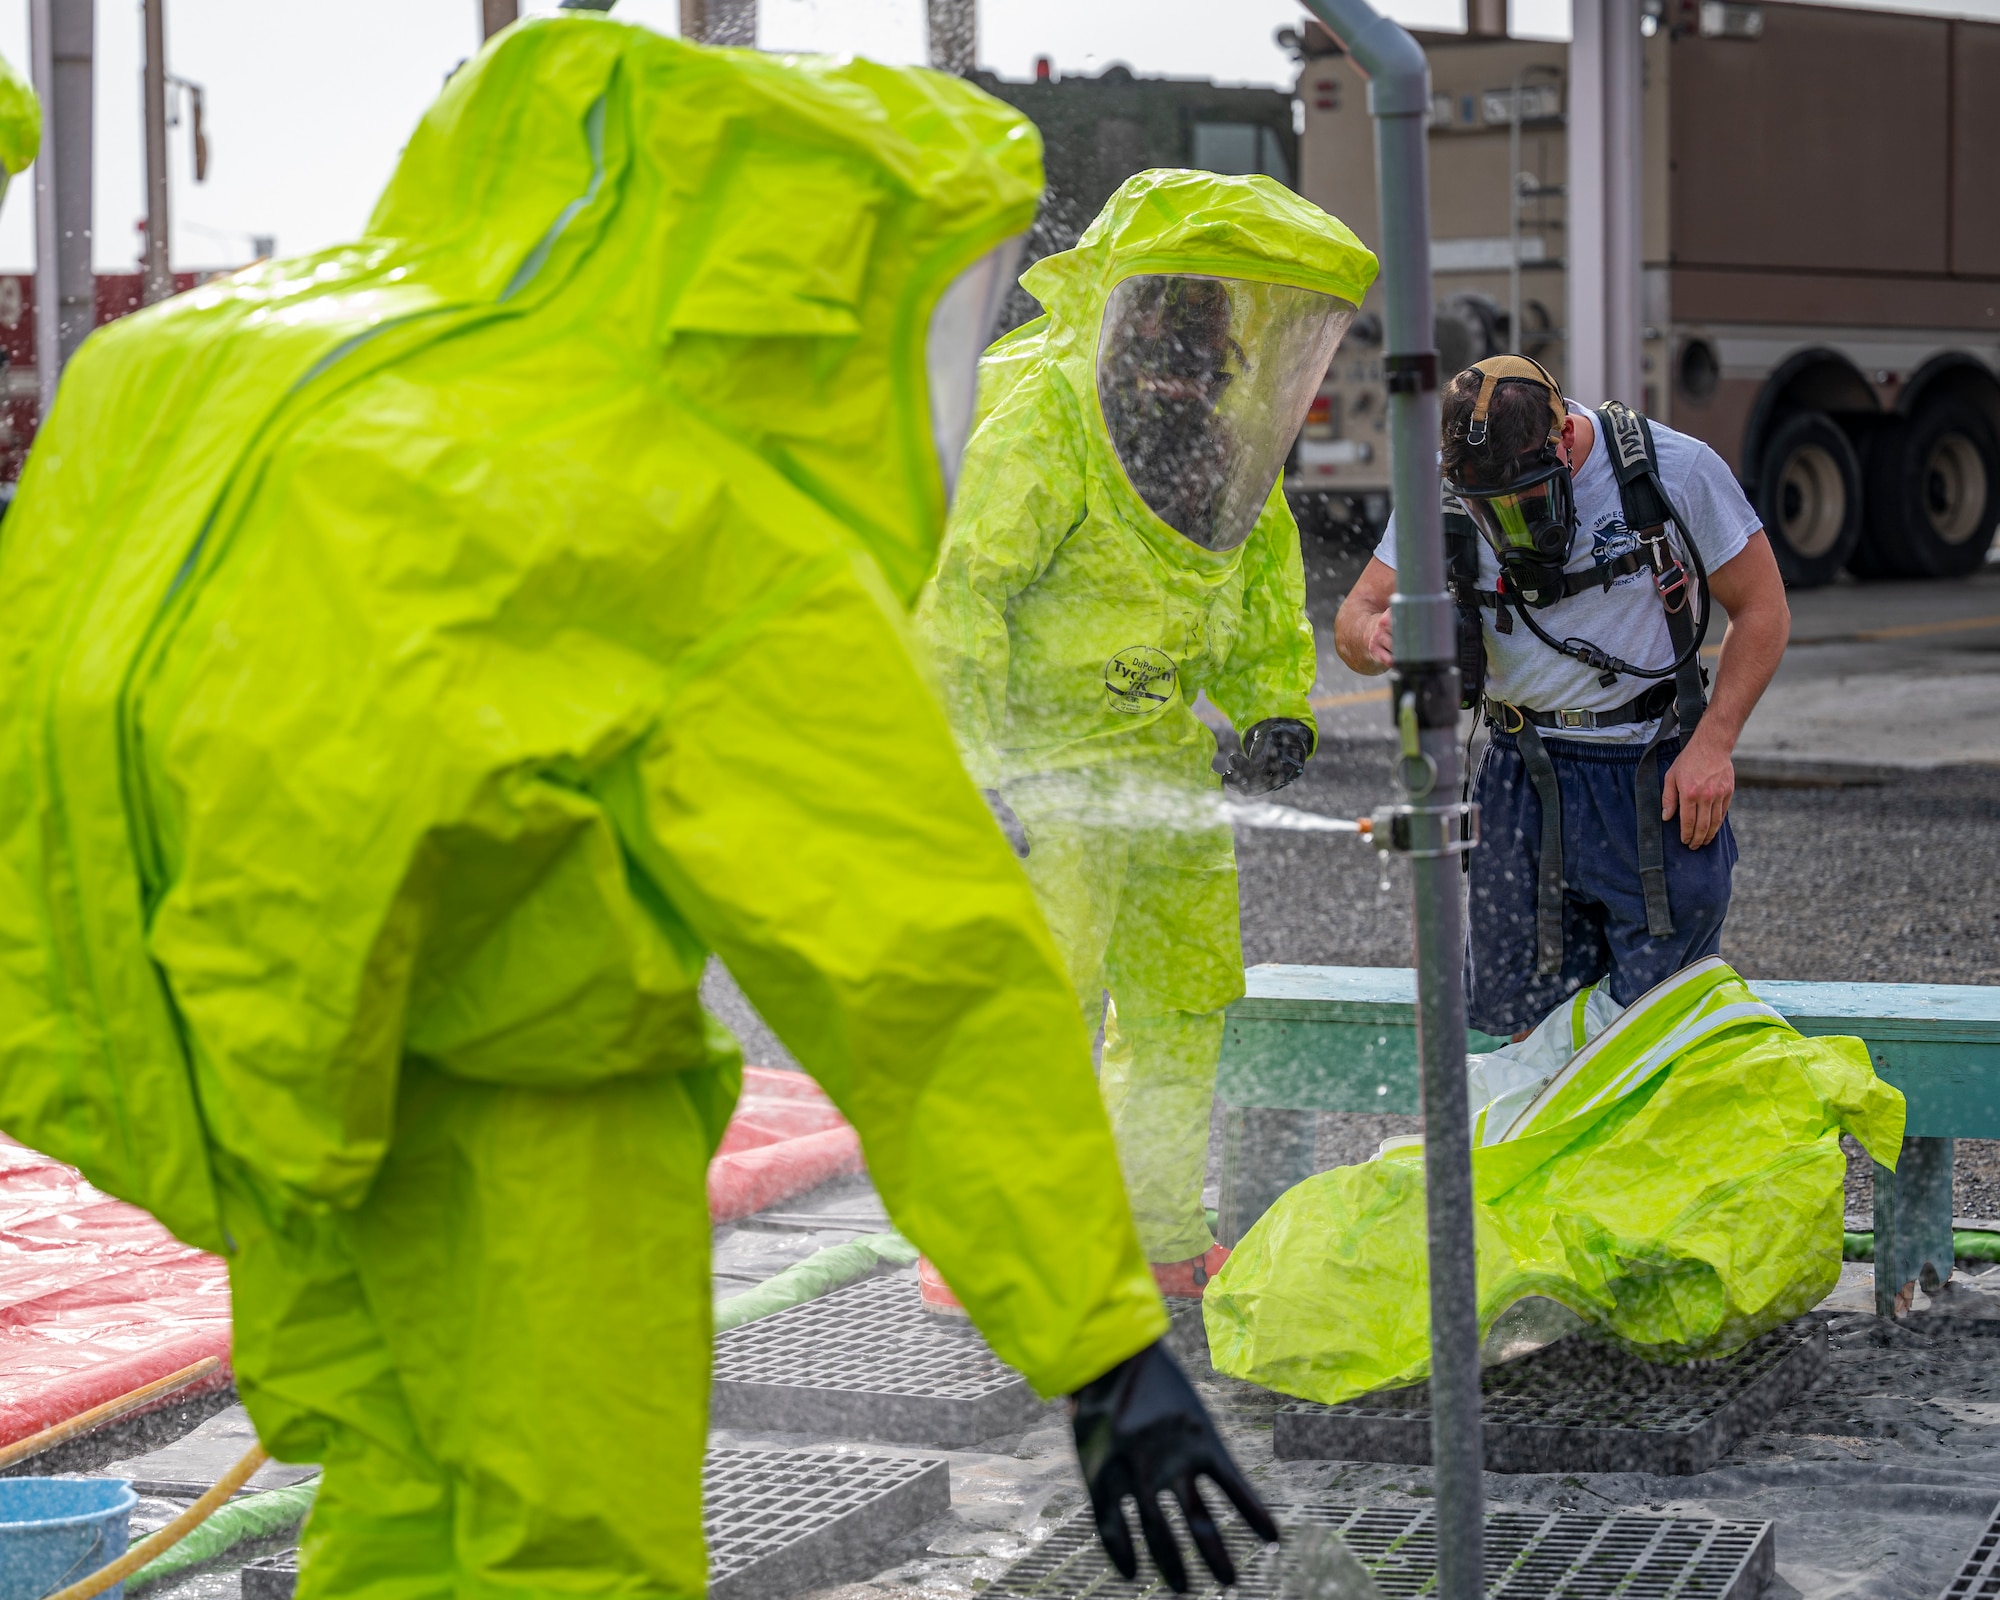 The 386th ECES Fire Department completed a practical exam for the Department of Defense HAZMAT Technician program which involved over 100 hours of instruction and 16 hours of hands-on training for each student.